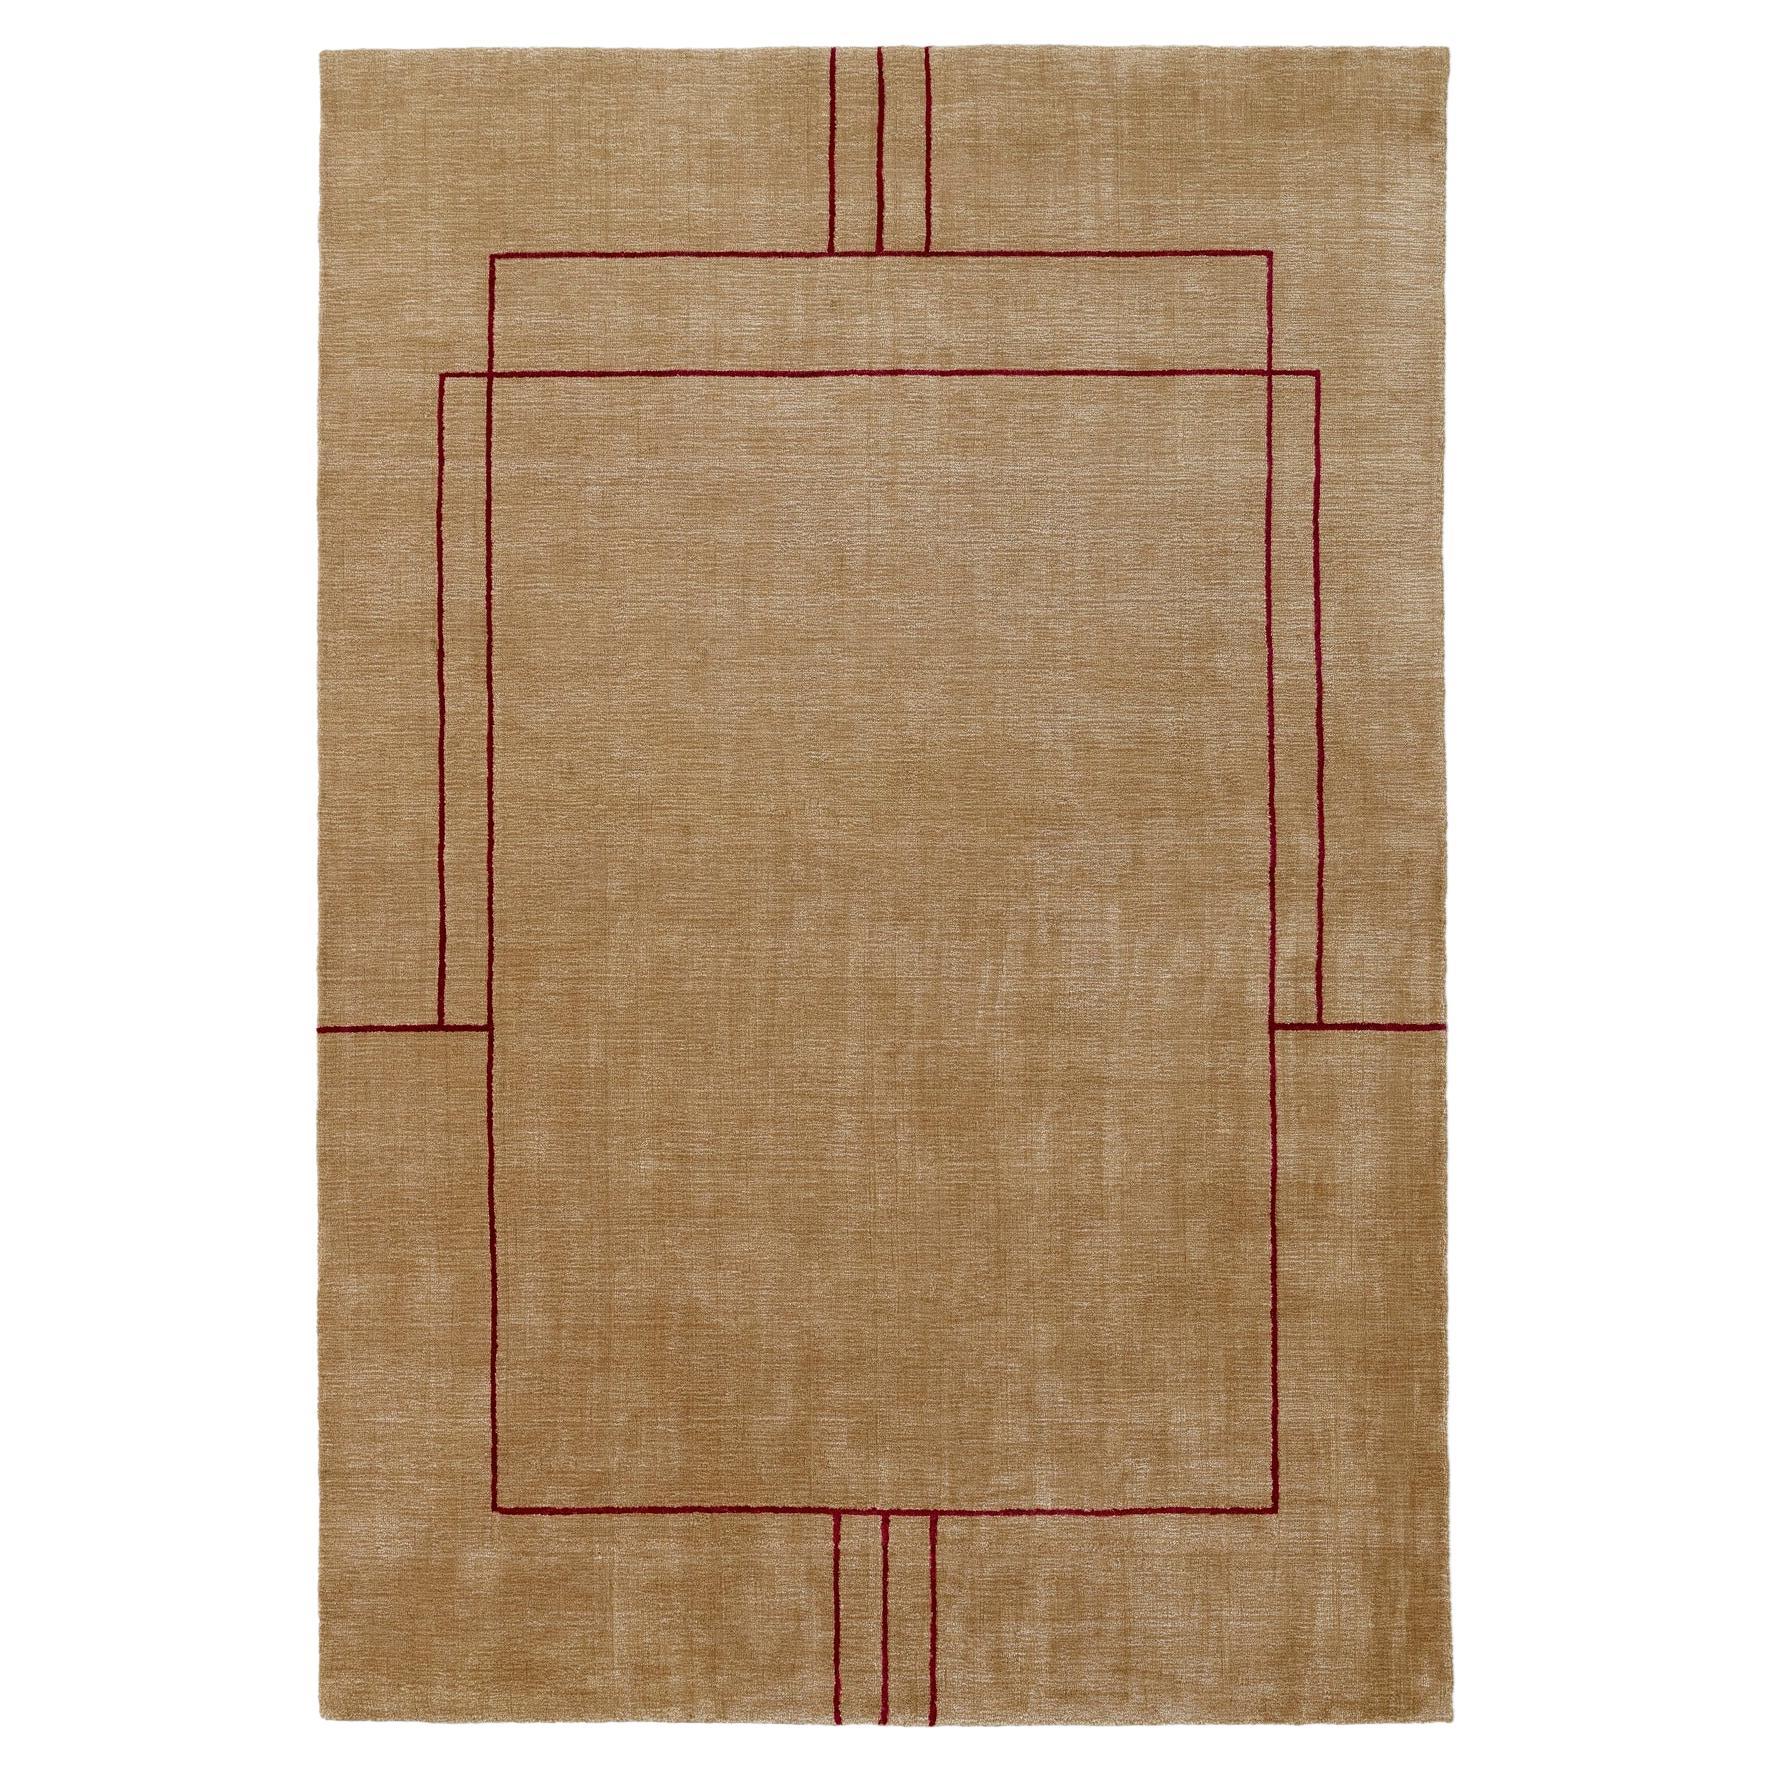 Cruise AP12 Rug, Bombay Golden Brown, Designed by All the Way to Paris for &T  For Sale